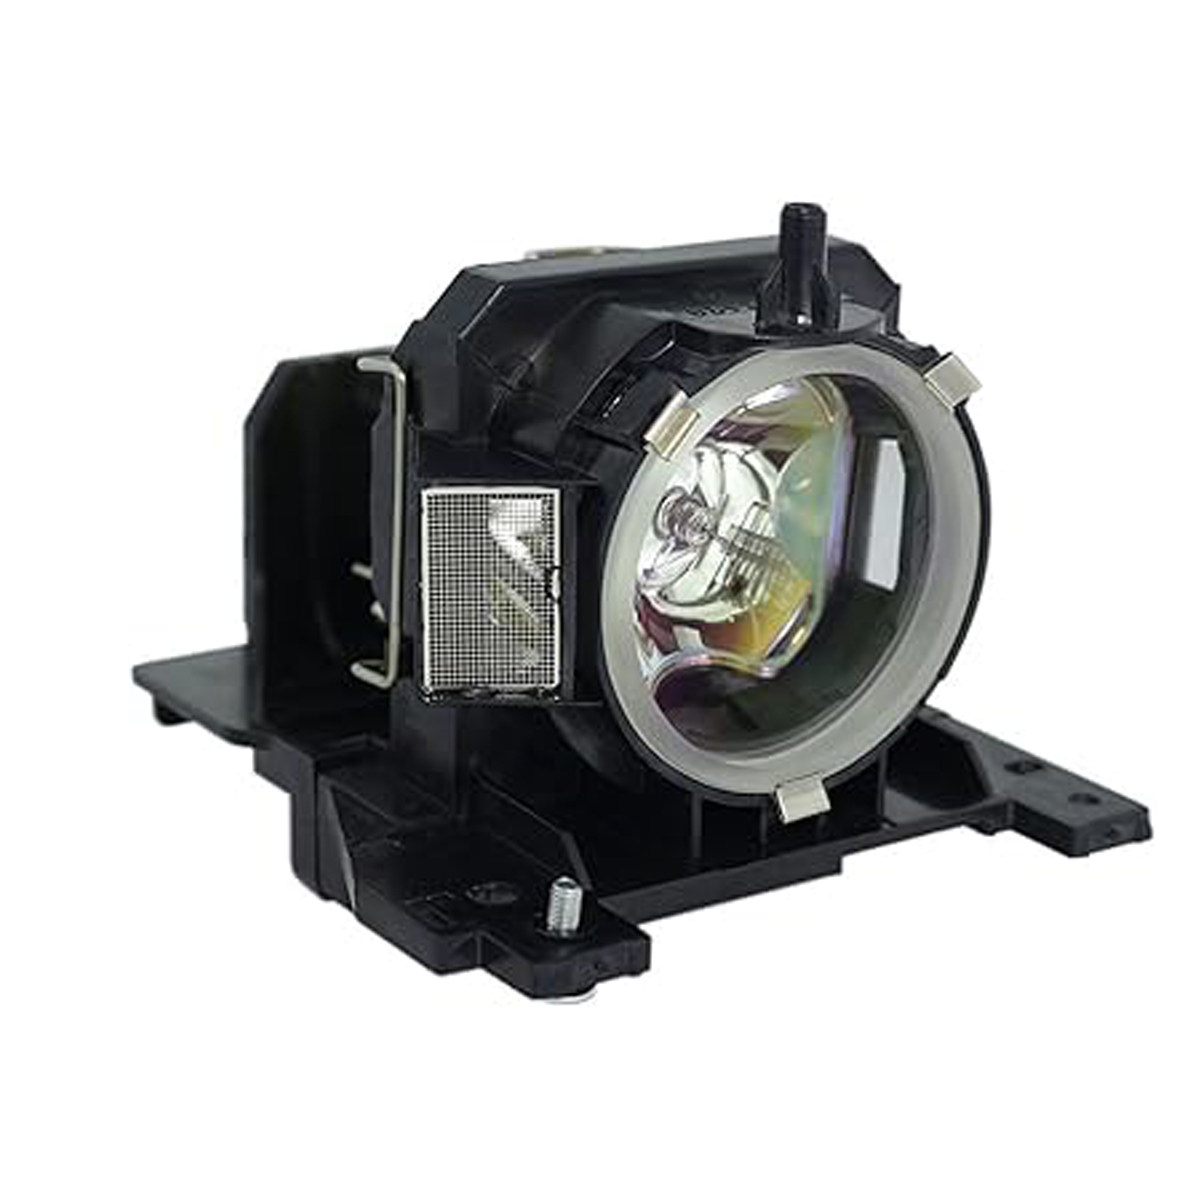 Replacement Projector lamp 78-6966-9917-2 For 3M CL66X